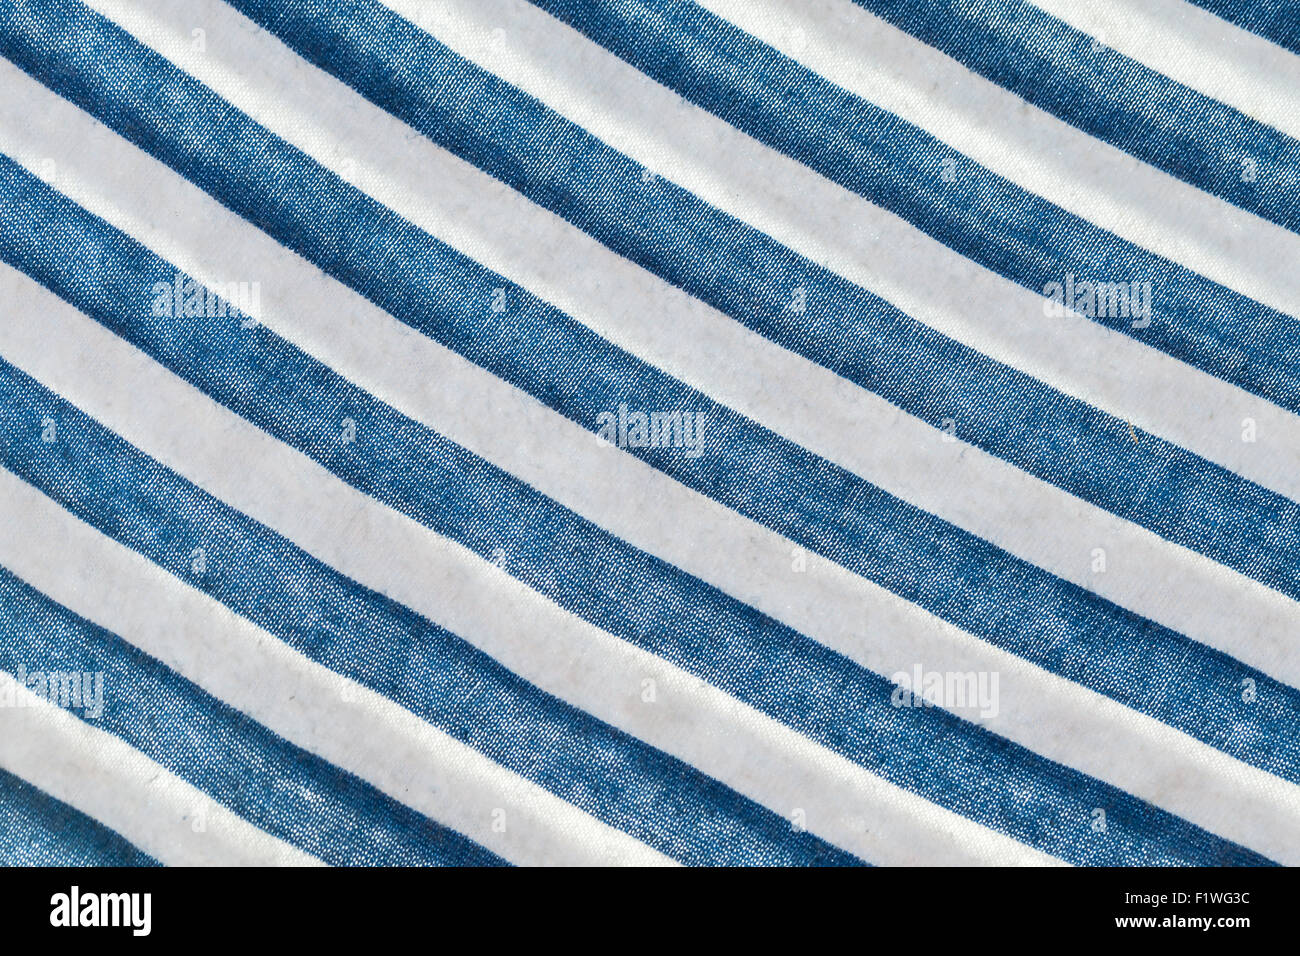 Telnyashka. Blue and white striped fabric pattern, it is iconic uniform  garment worn by the Russian Navy, Airborne Troops and Na Stock Photo - Alamy